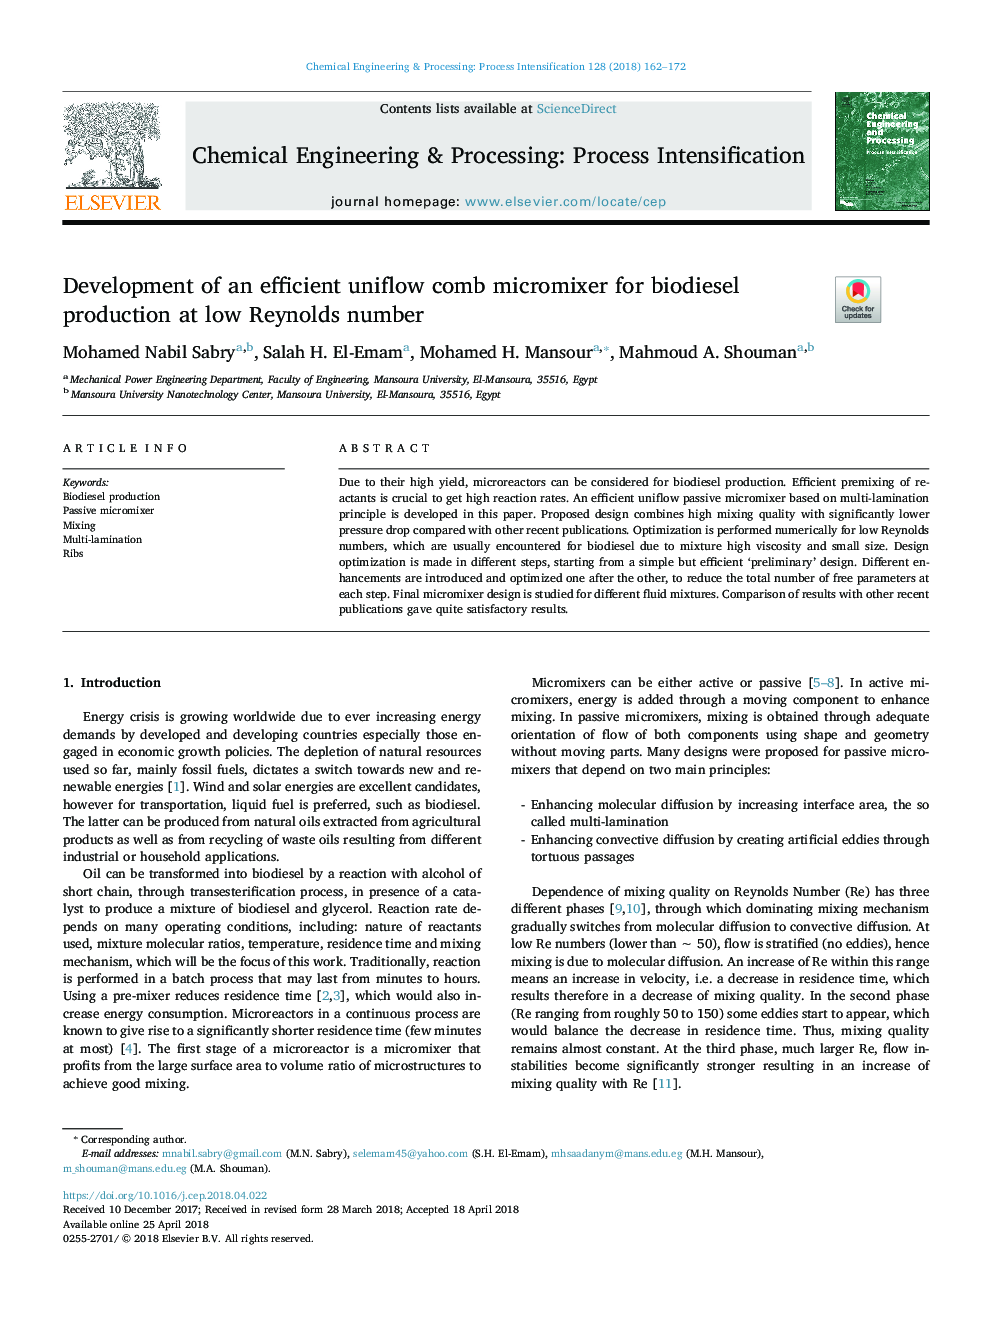 Development of an efficient uniflow comb micromixer for biodiesel production at low Reynolds number